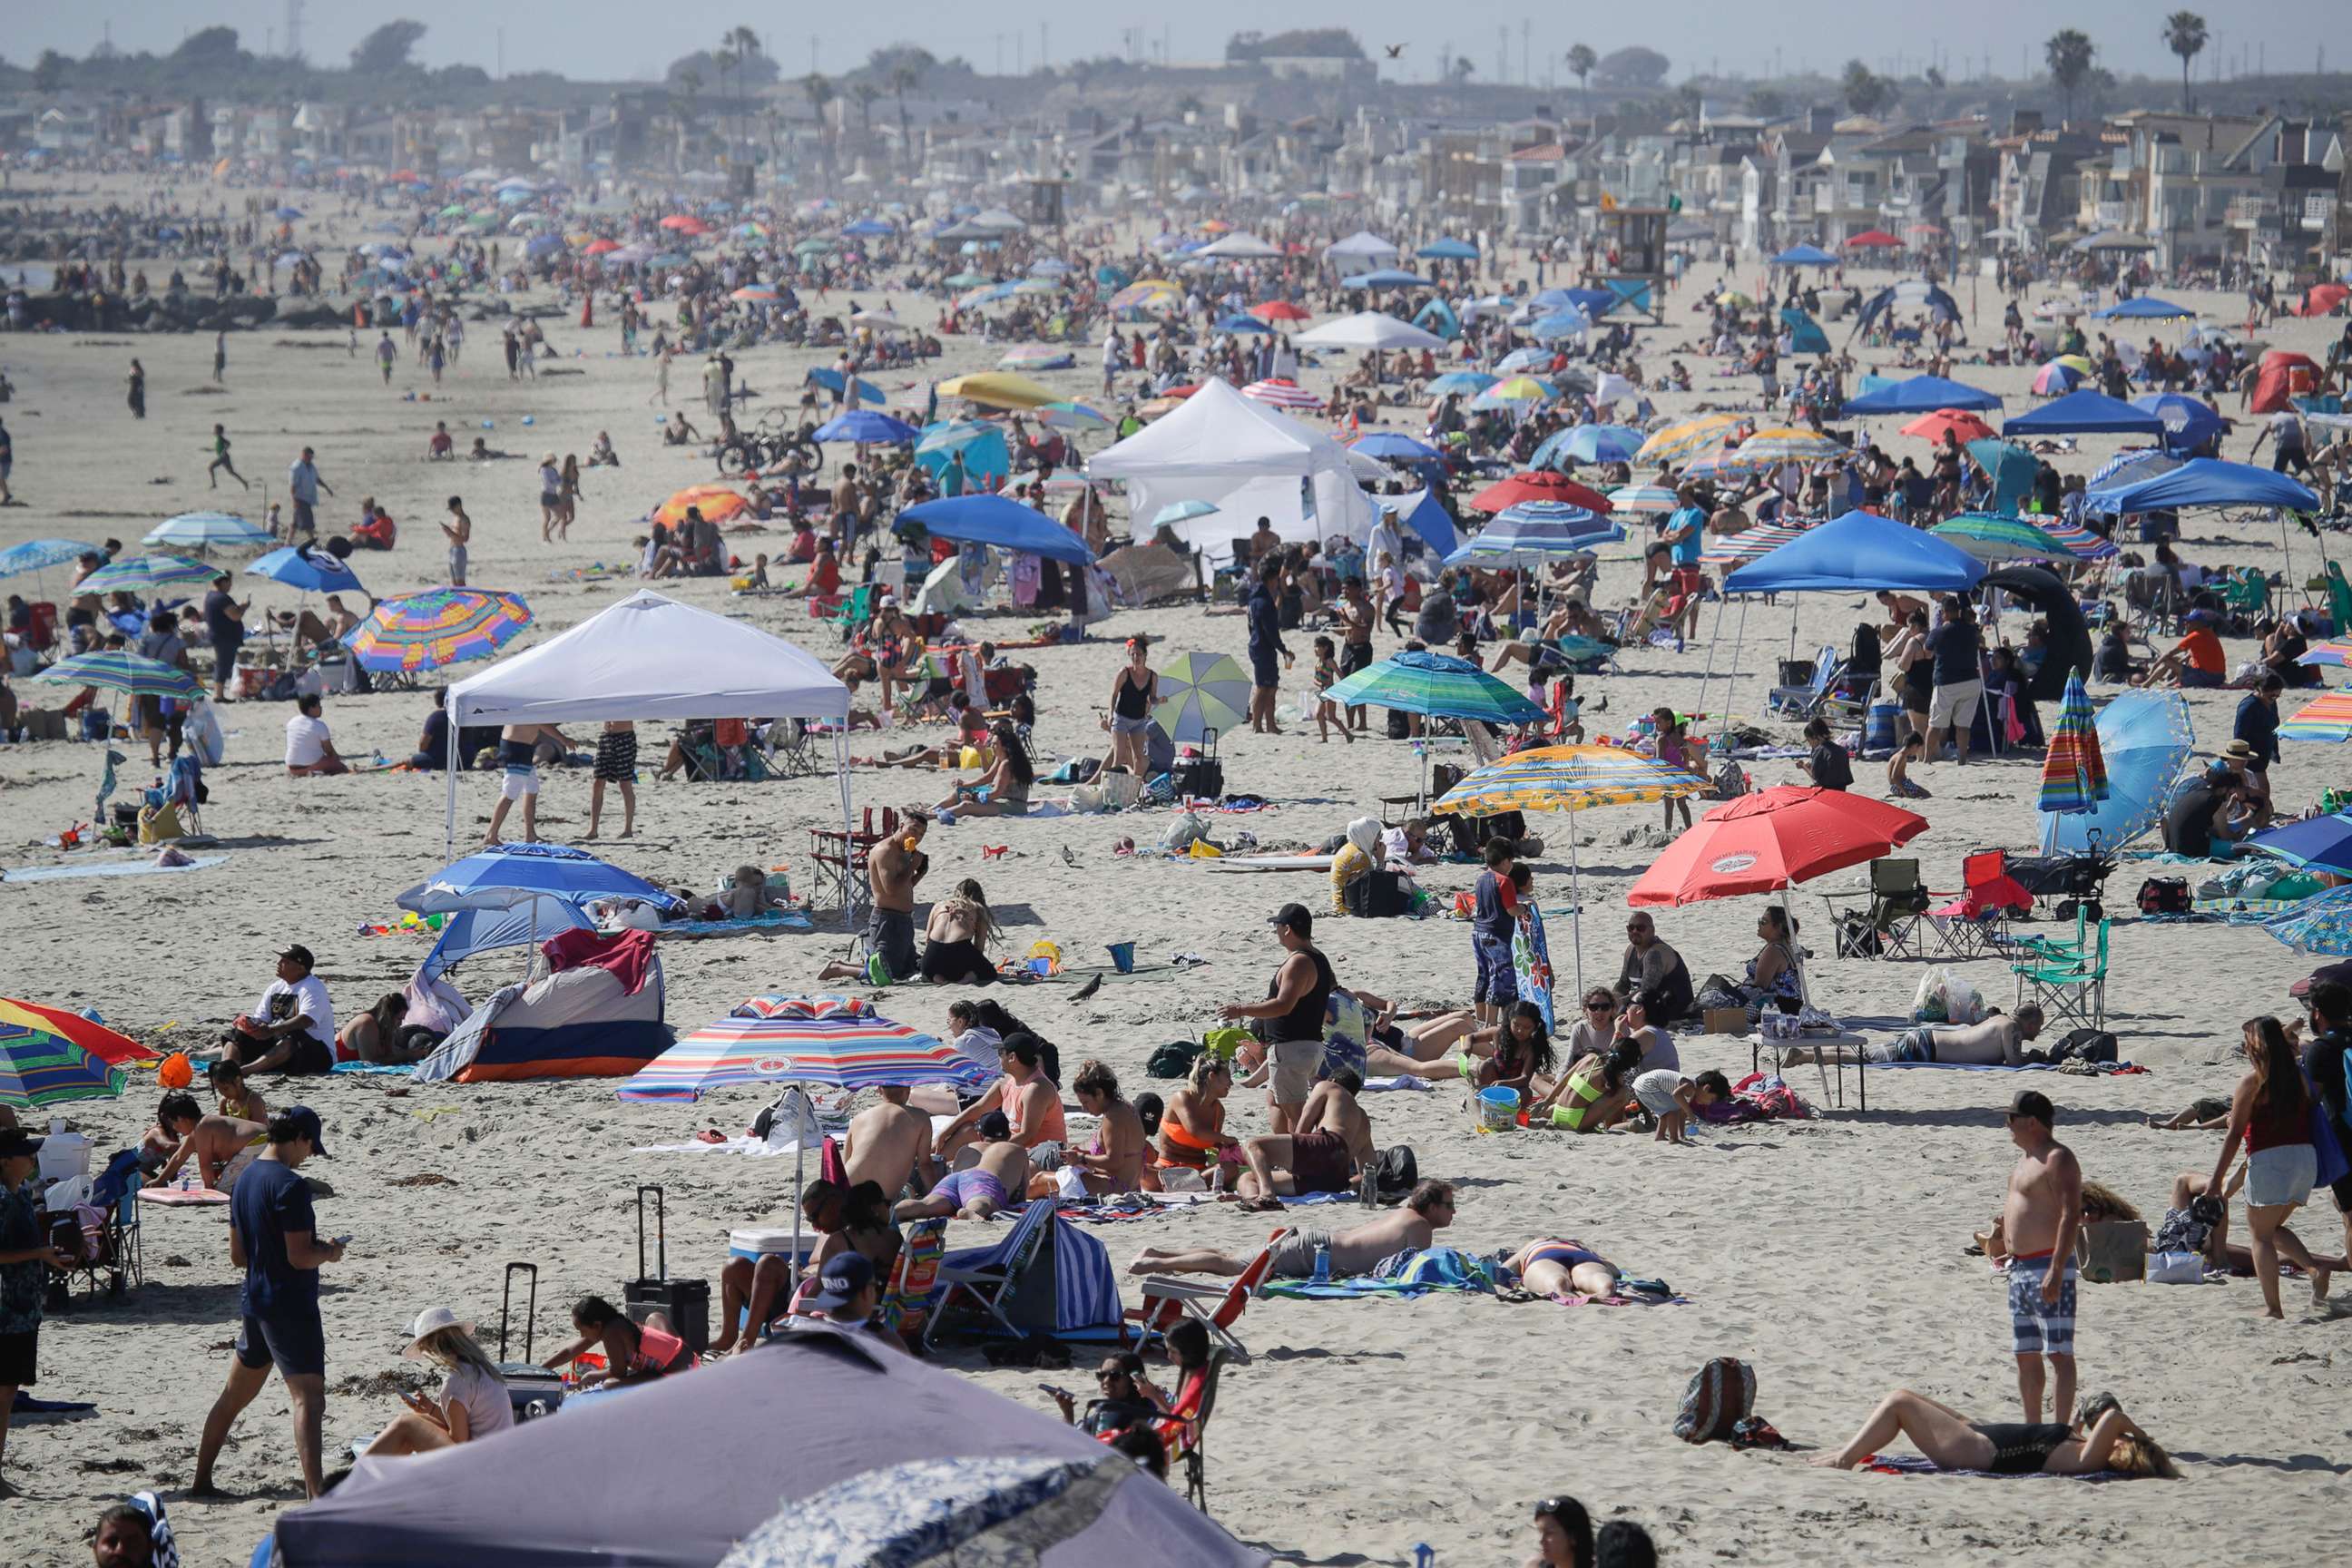 PHOTO: In this May 24, 2020, file photo, people gather on the beach during the Memorial Day weekend in Newport Beach, Calif.